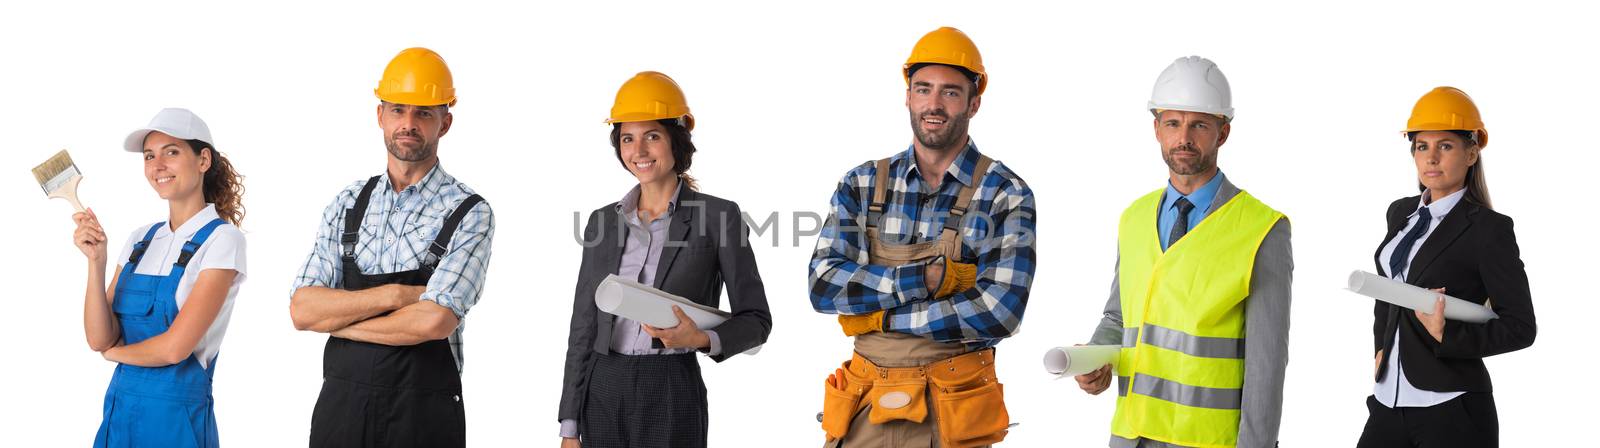 Construction industry workers by ALotOfPeople